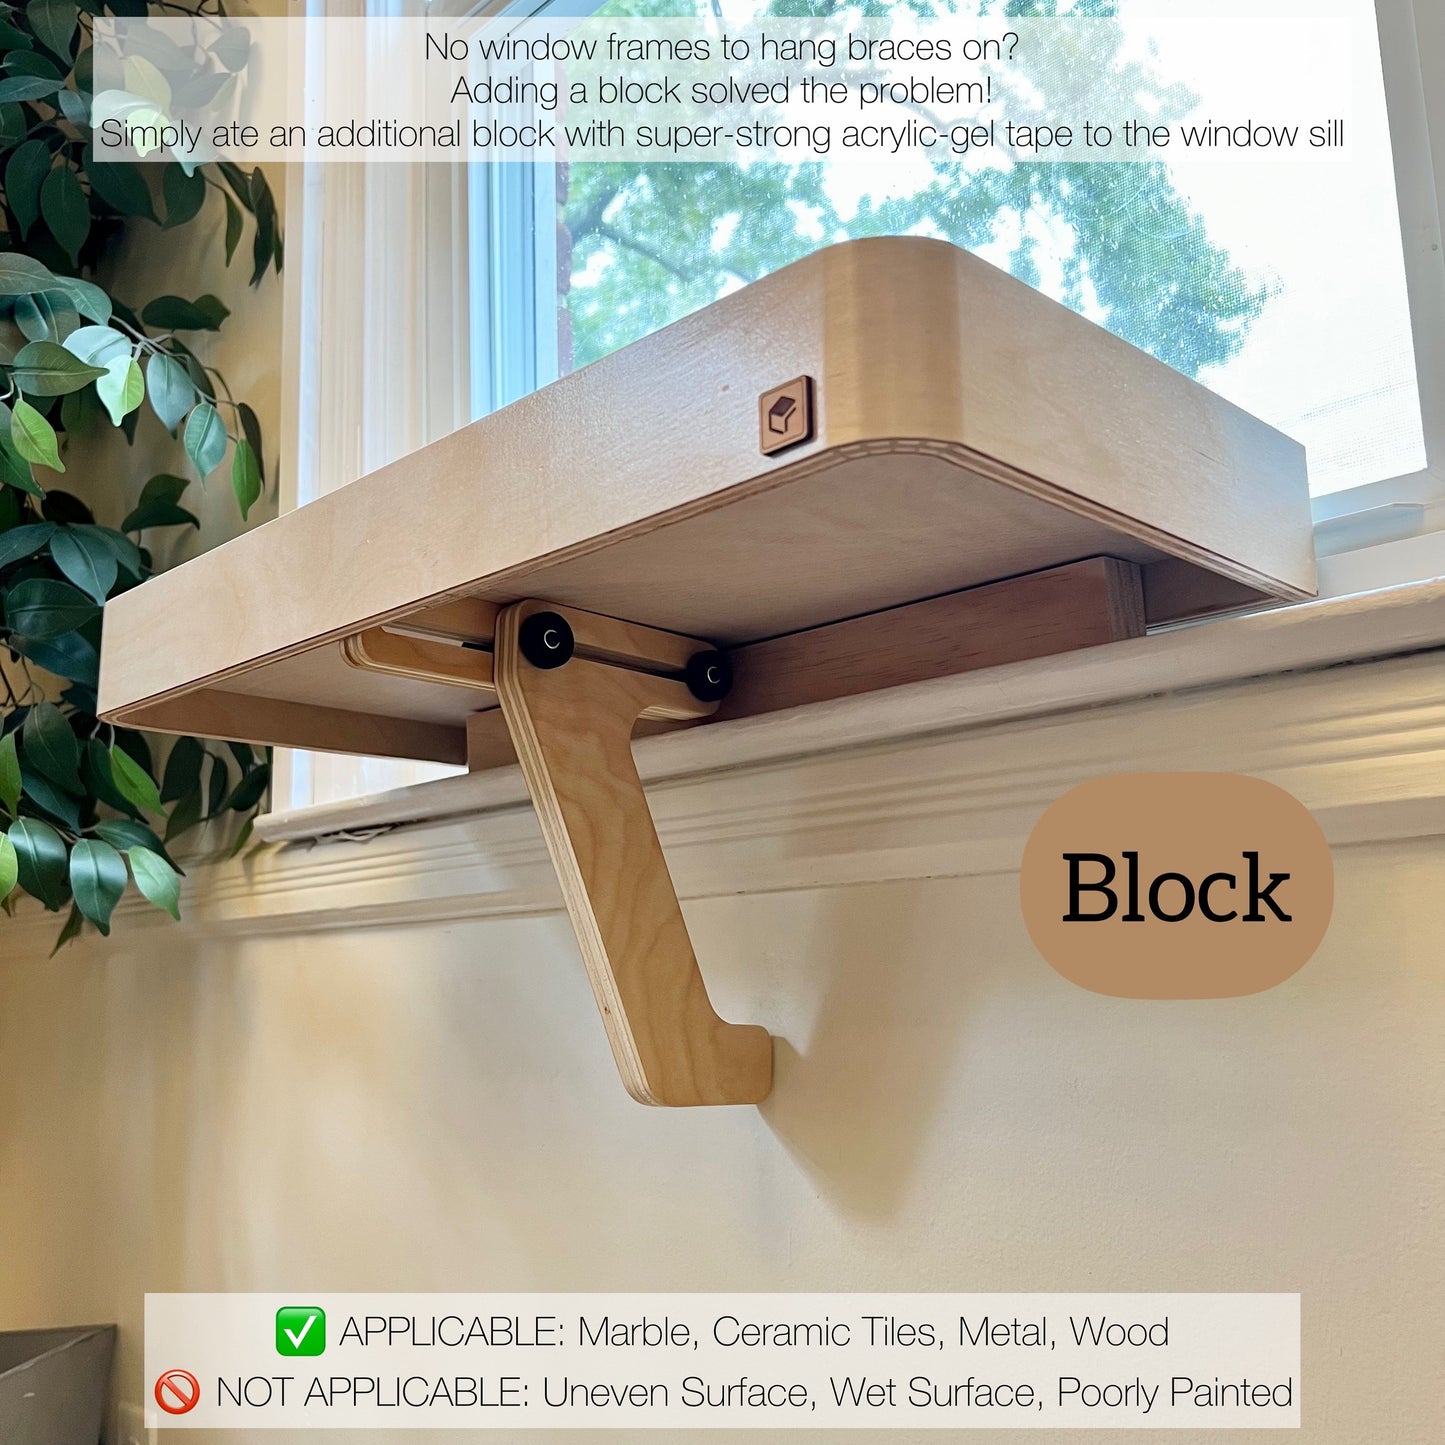 23"x10" Cat Window Perch_Sturdy-Safe support leg_Installed-removed 1 minute_No tools No nails_Cat Window Shelf_Window Cat Bed_Cat Lover Gift